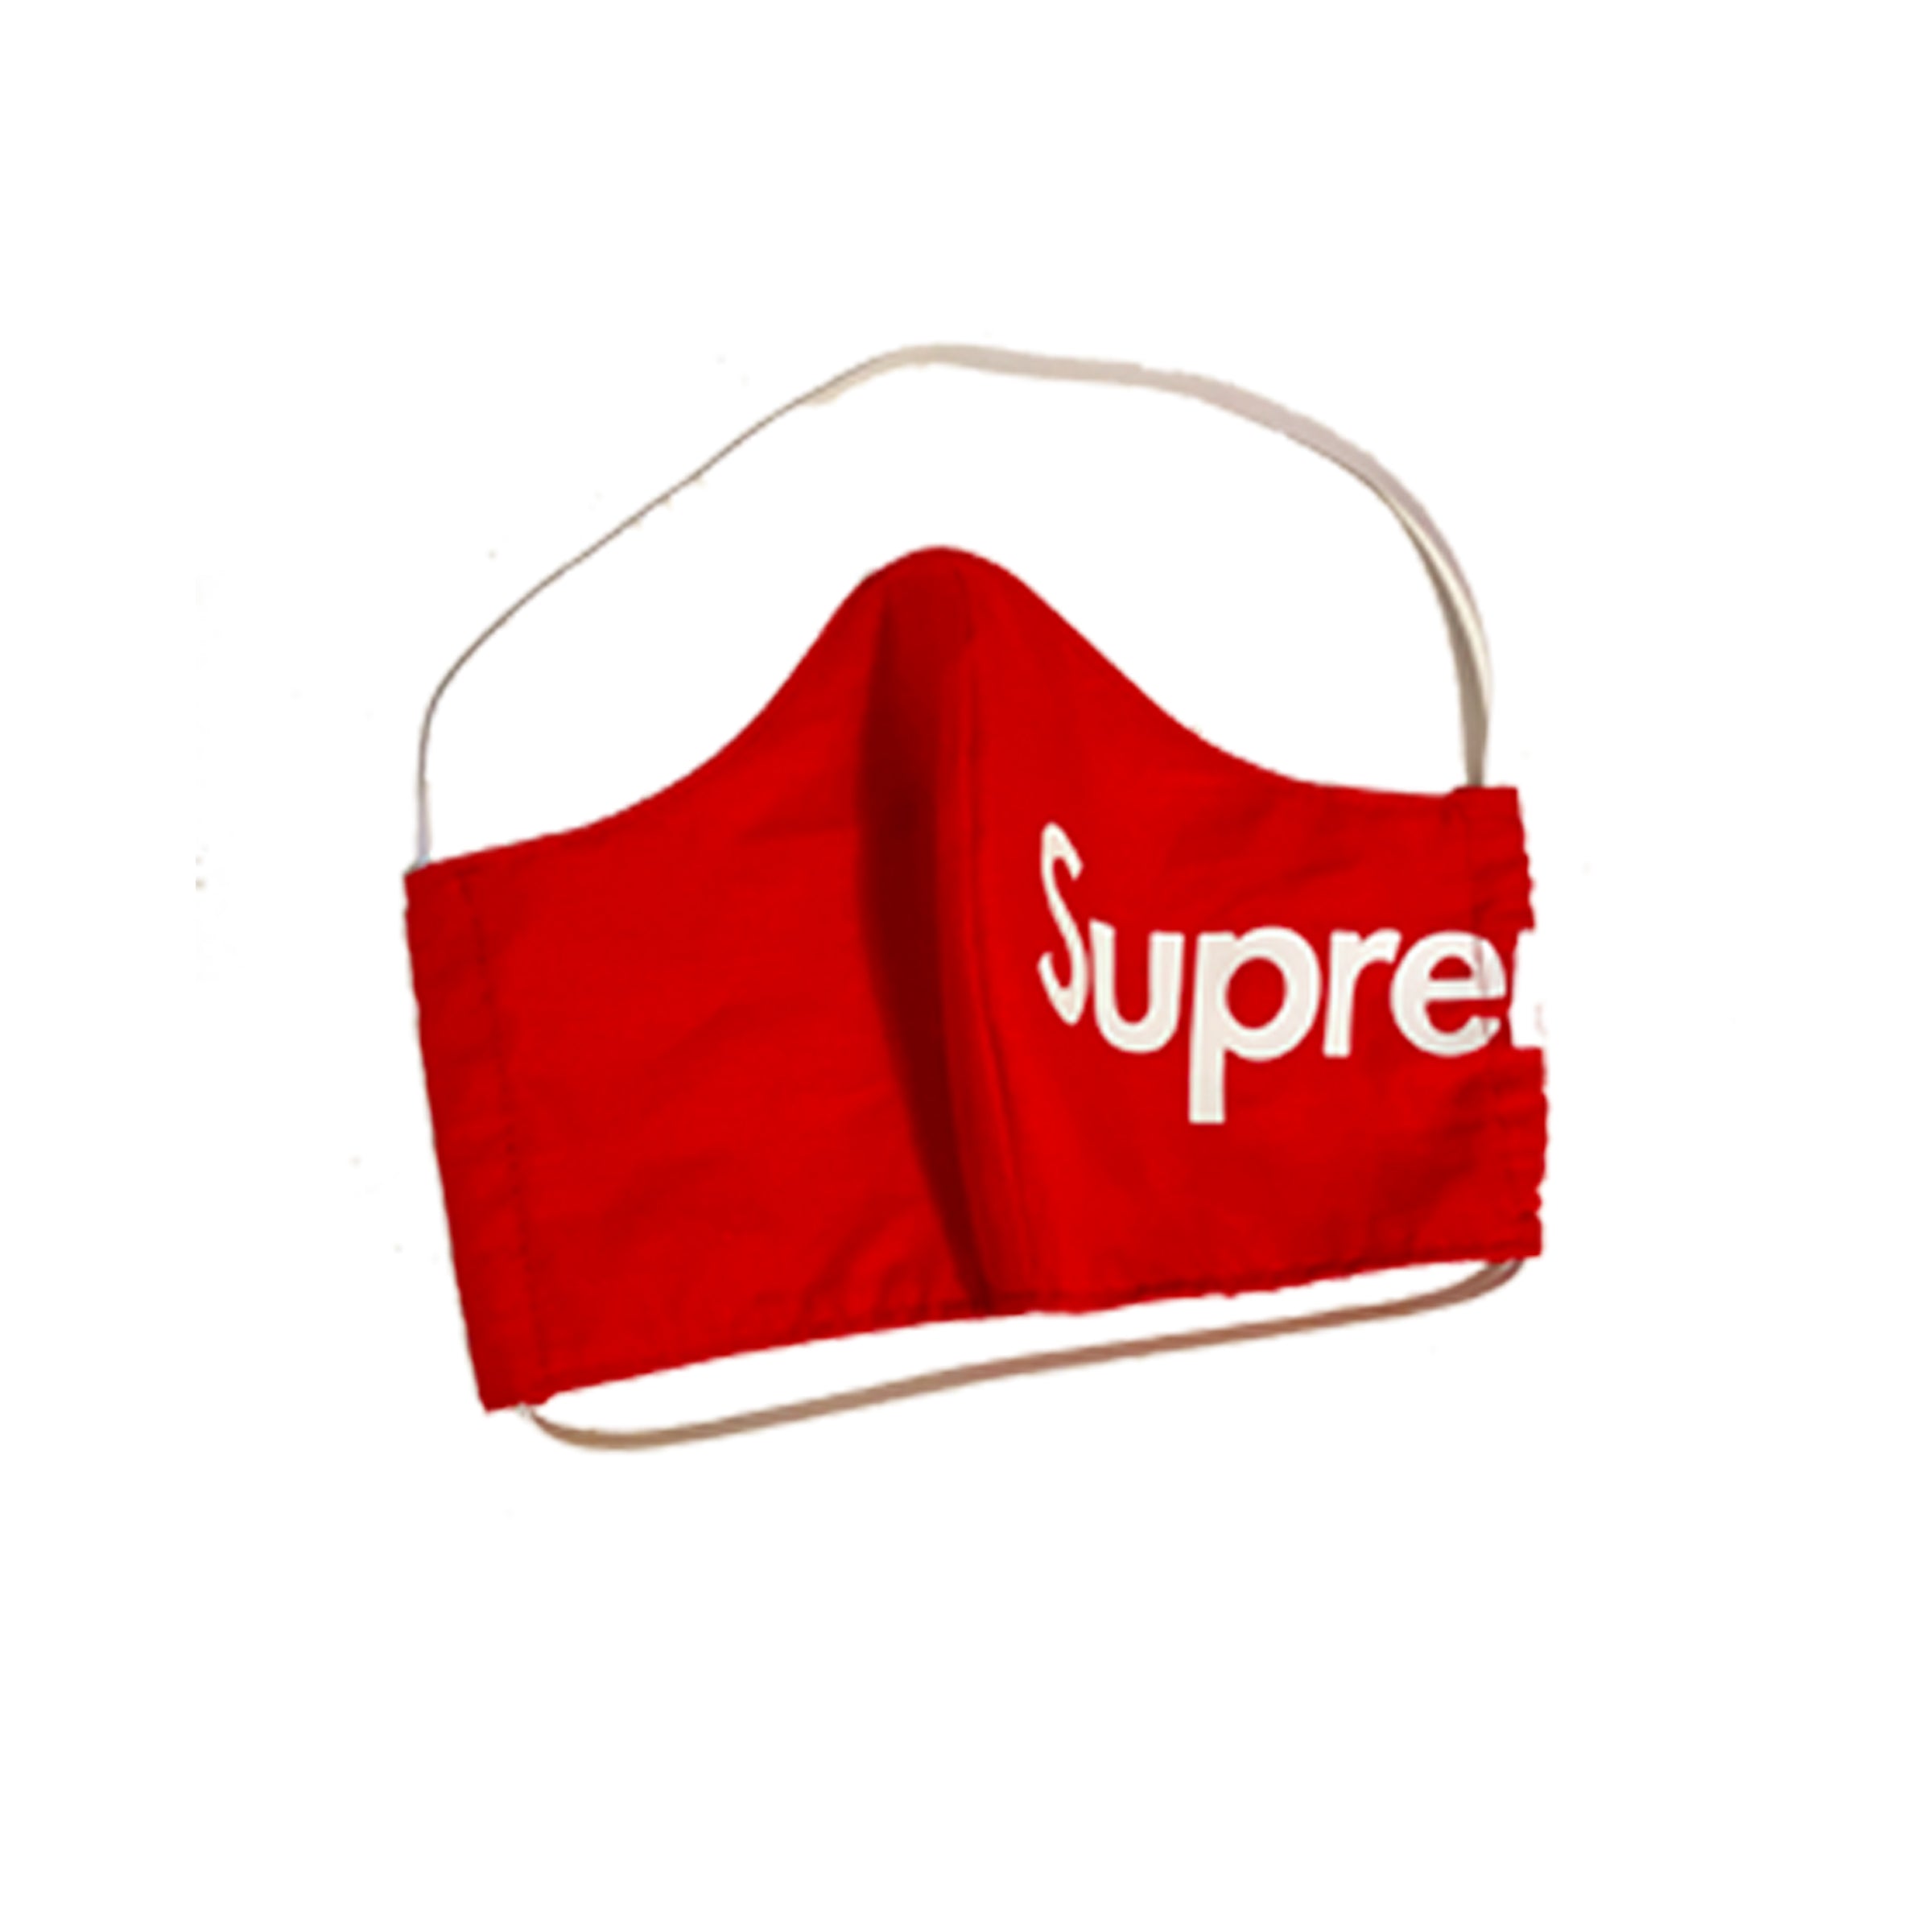 Supreme, Accessories, New Adult Unisex Face Mask